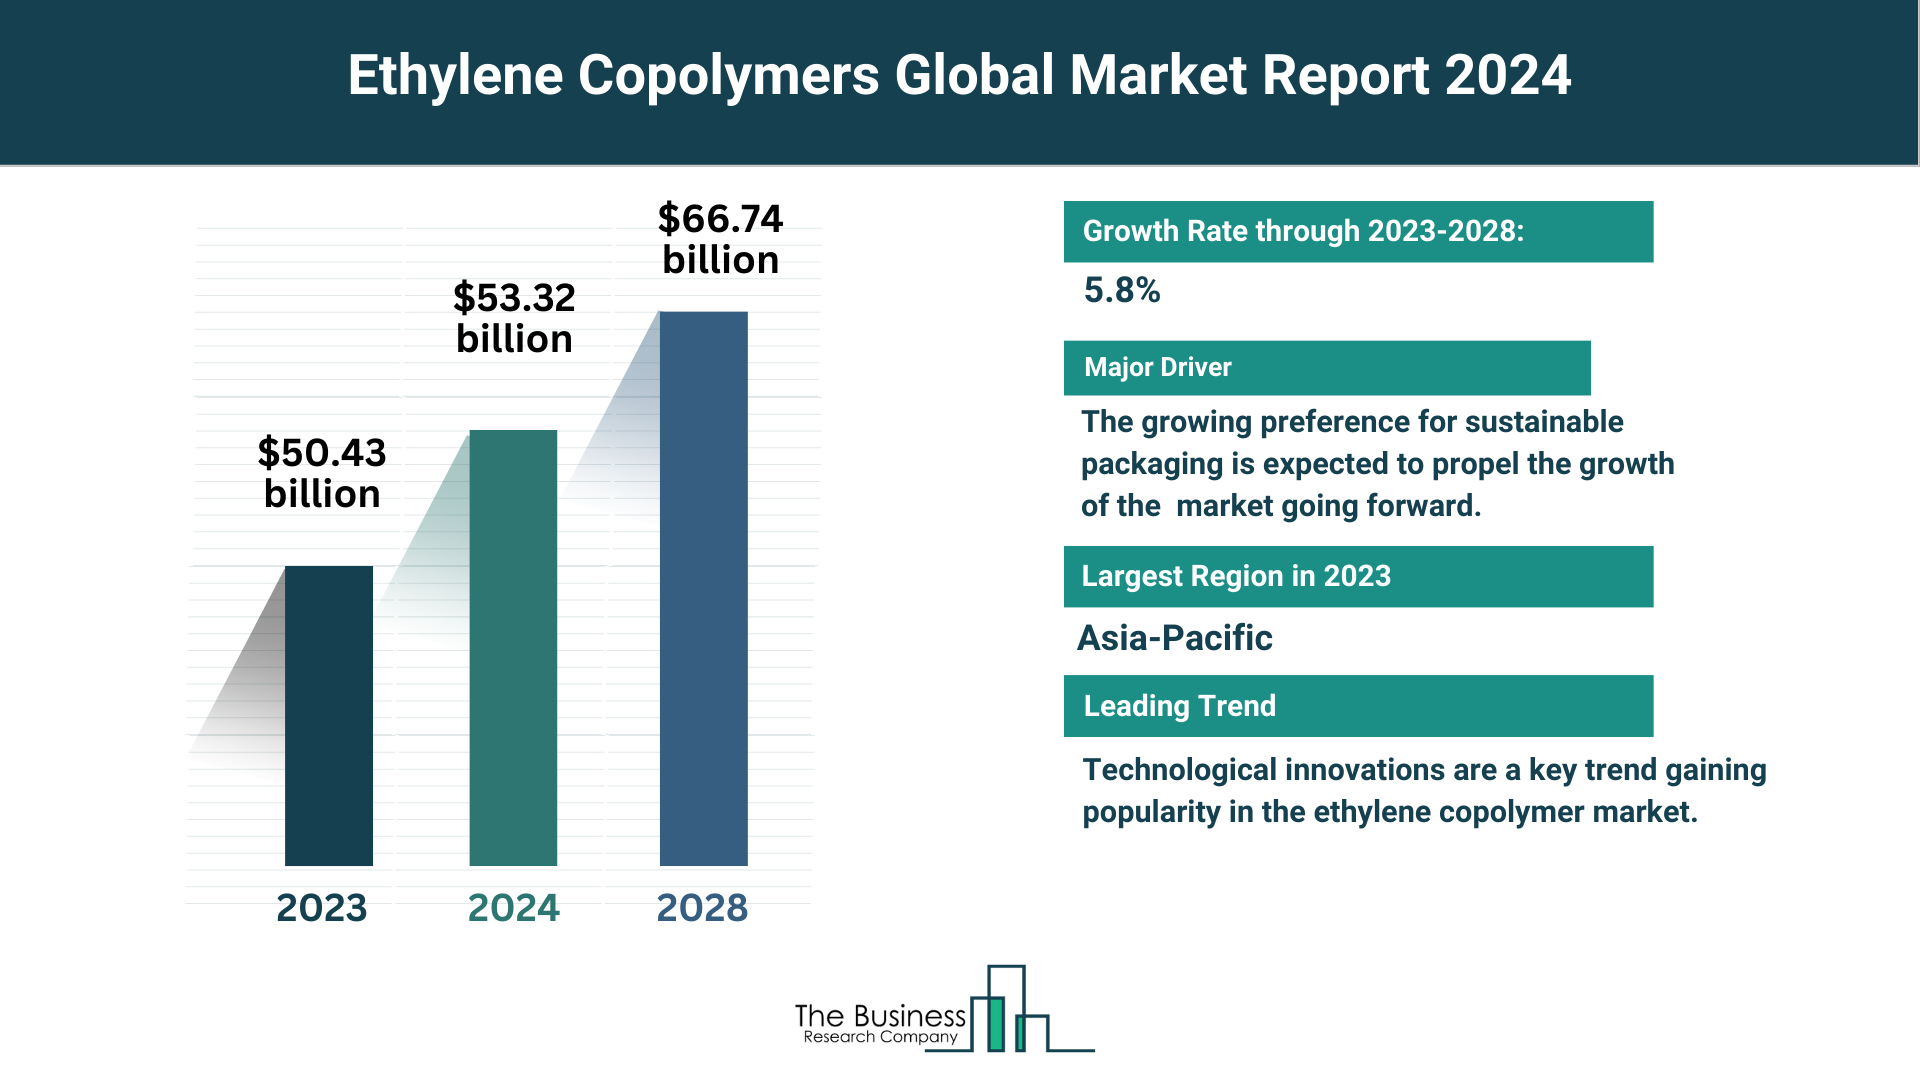 Global Ethylene Copolymers Market Report 2024: Size, Drivers, And Top Segments